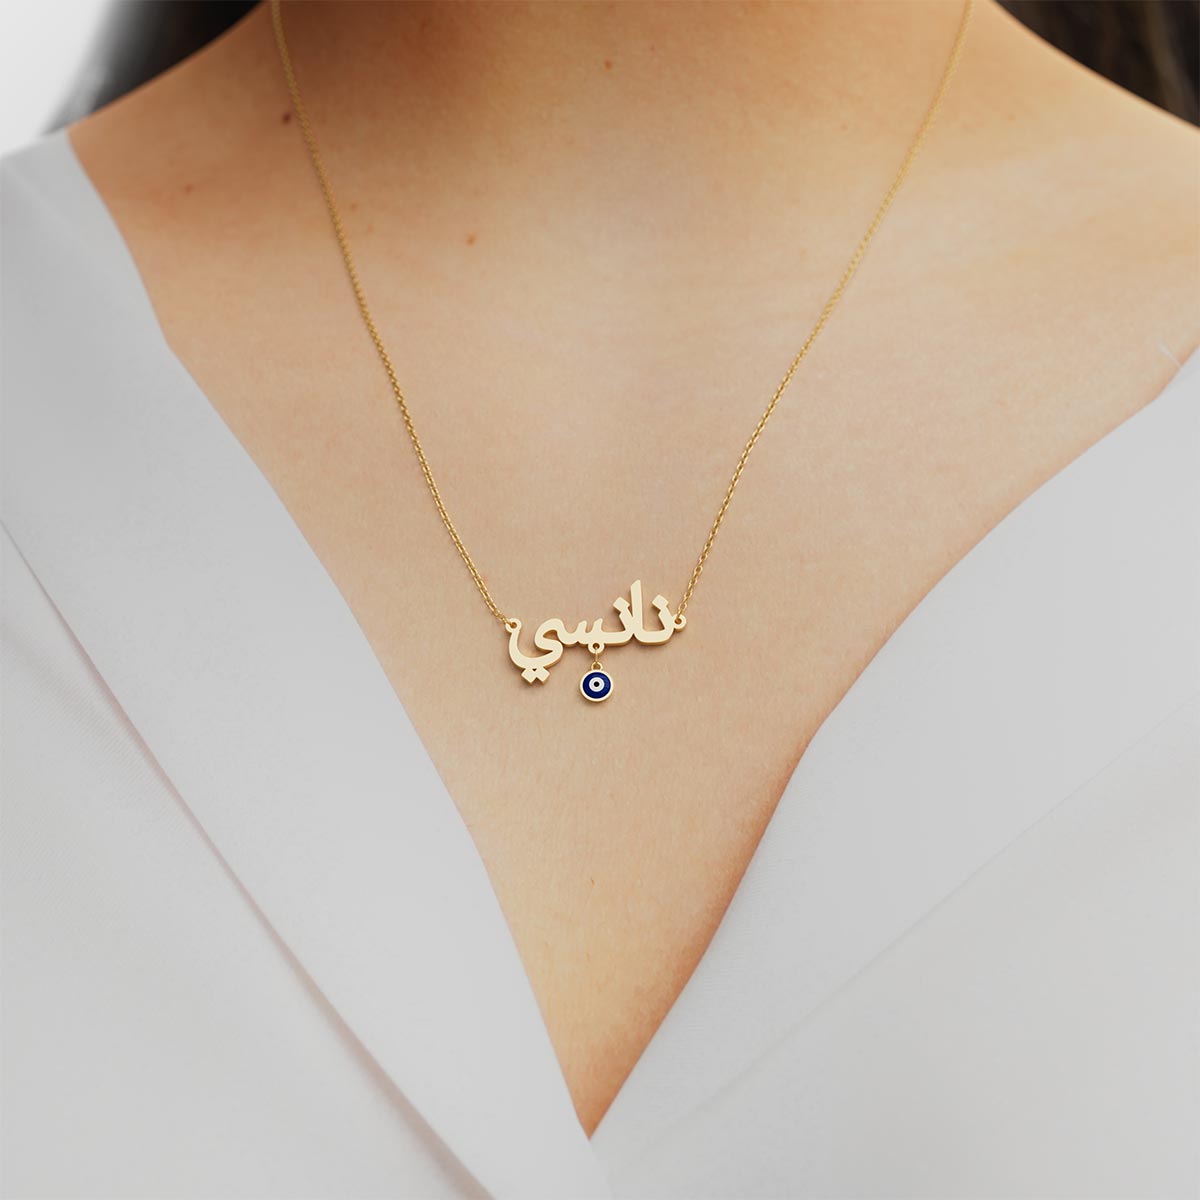 Arabic Personalized Name Necklace With Hanging Round Evil Eye Charm